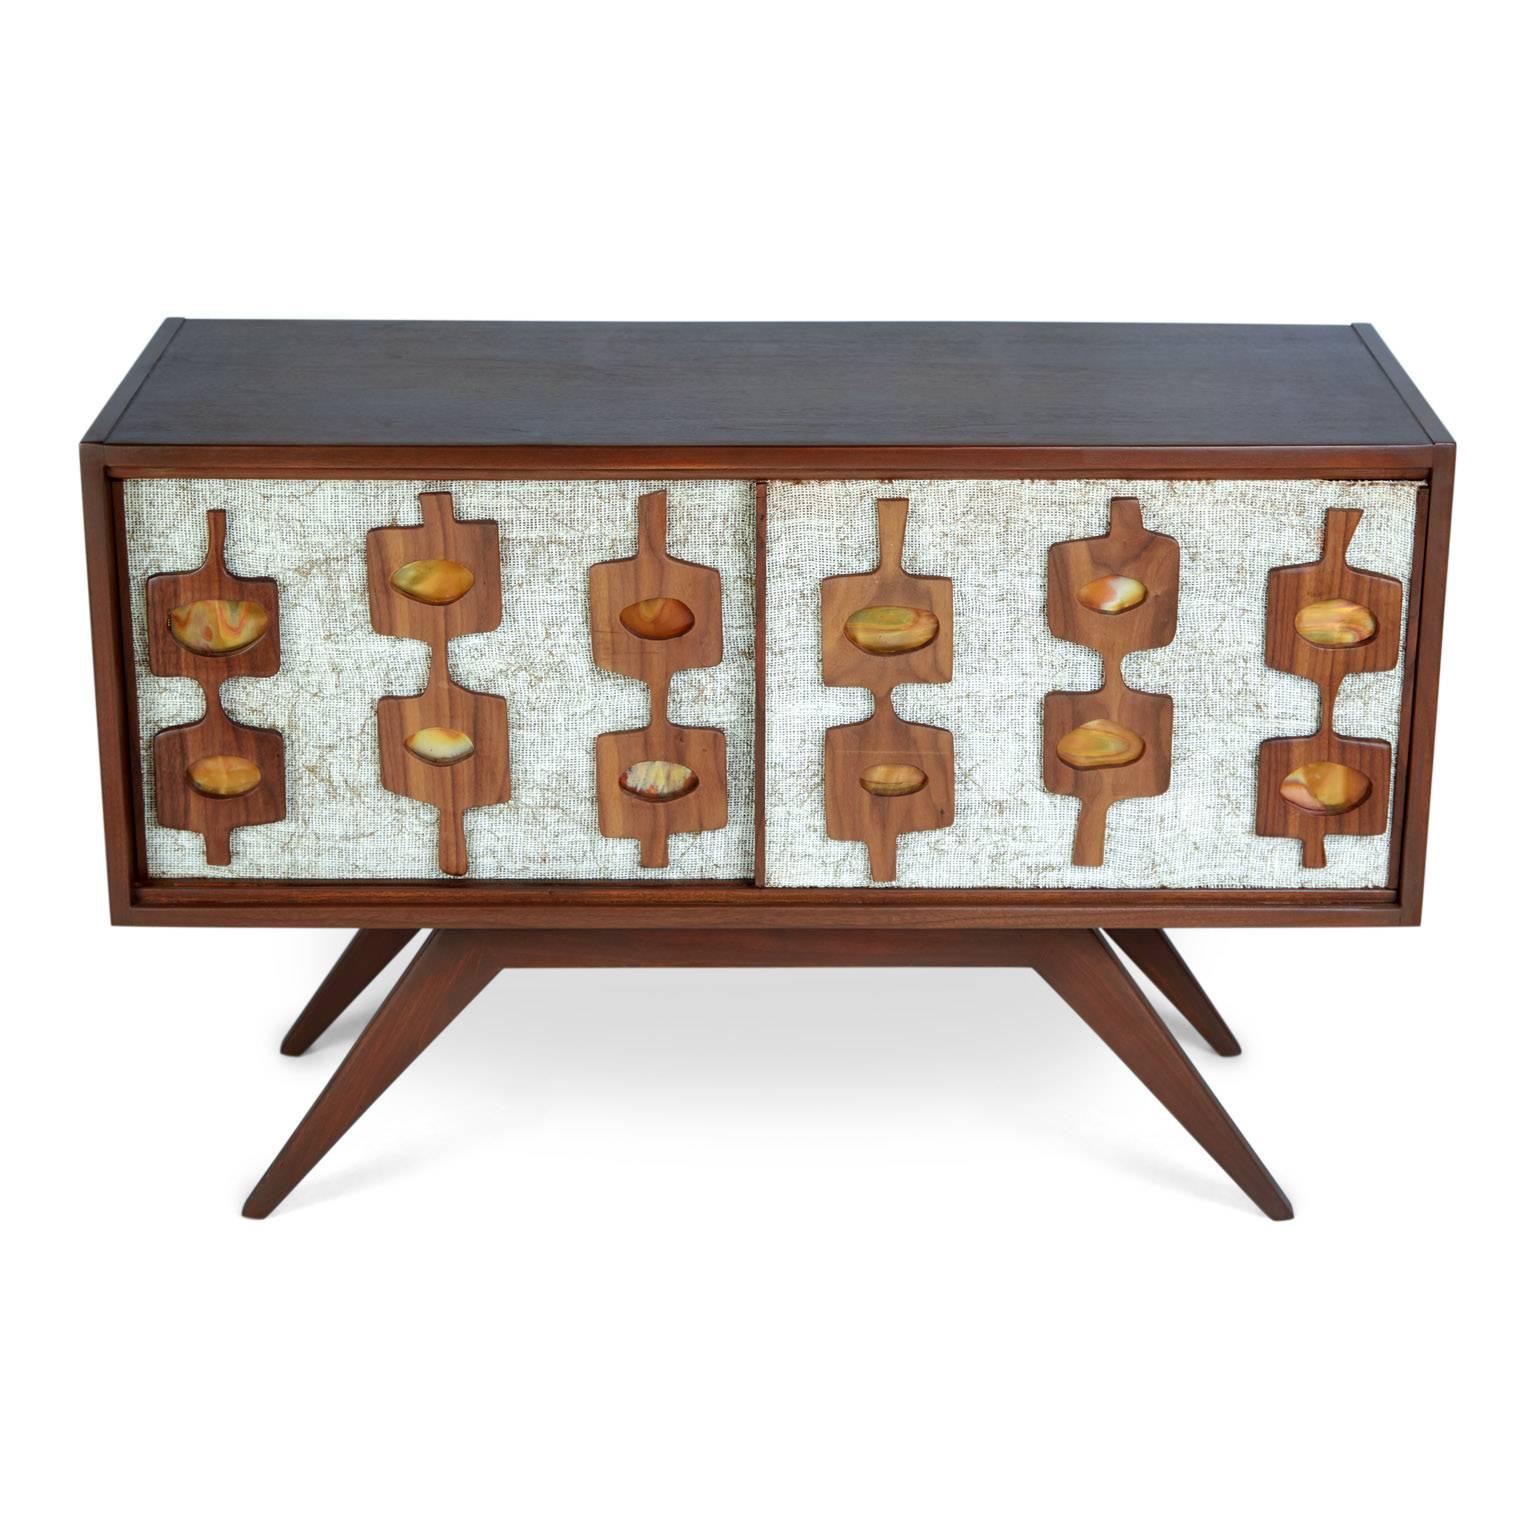 A custom-made credenza crafted by local Los Angeles artisan Lou Ramirez. This petite proportioned credenza is illustrative of the Mid-Century Modern movement with a nod to the short lived Googie design era that was uniquely Los Angeles.

Featuring